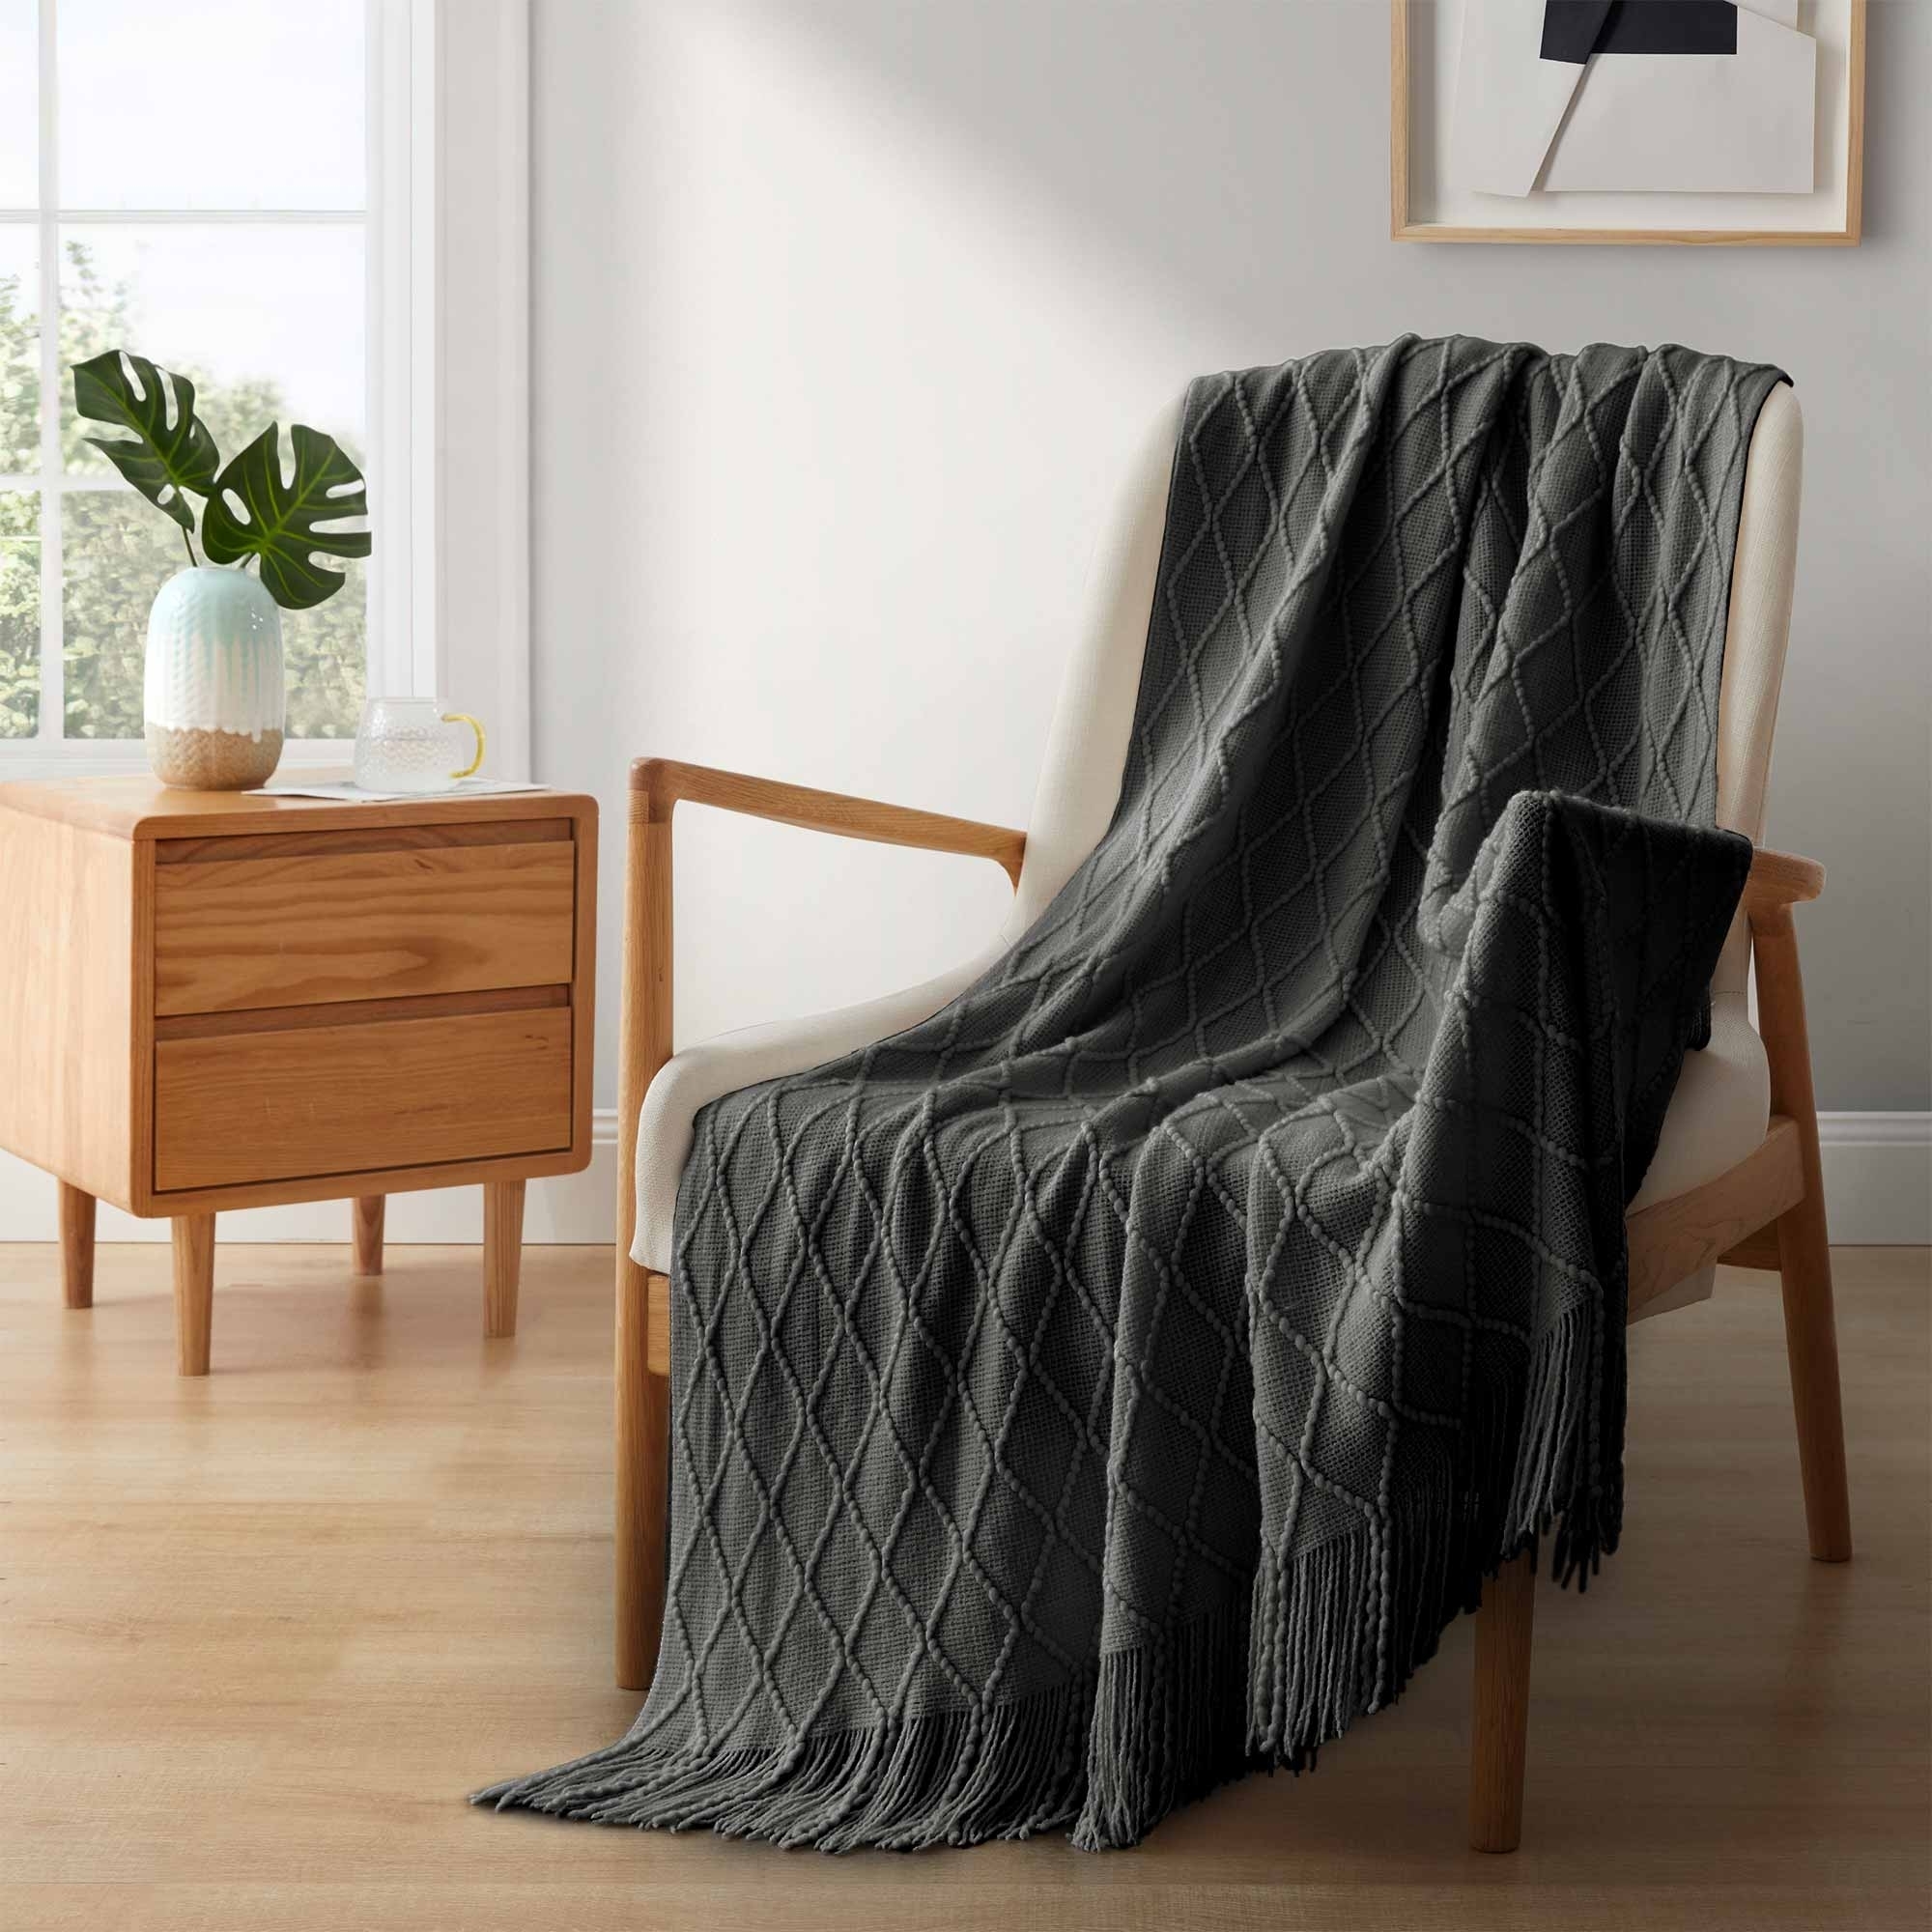 Ultra Soft Diamond Knit Throw Blanket 50x60-Perfect For Year-round Comfort - Carbon Grey, 50 In X 60 In